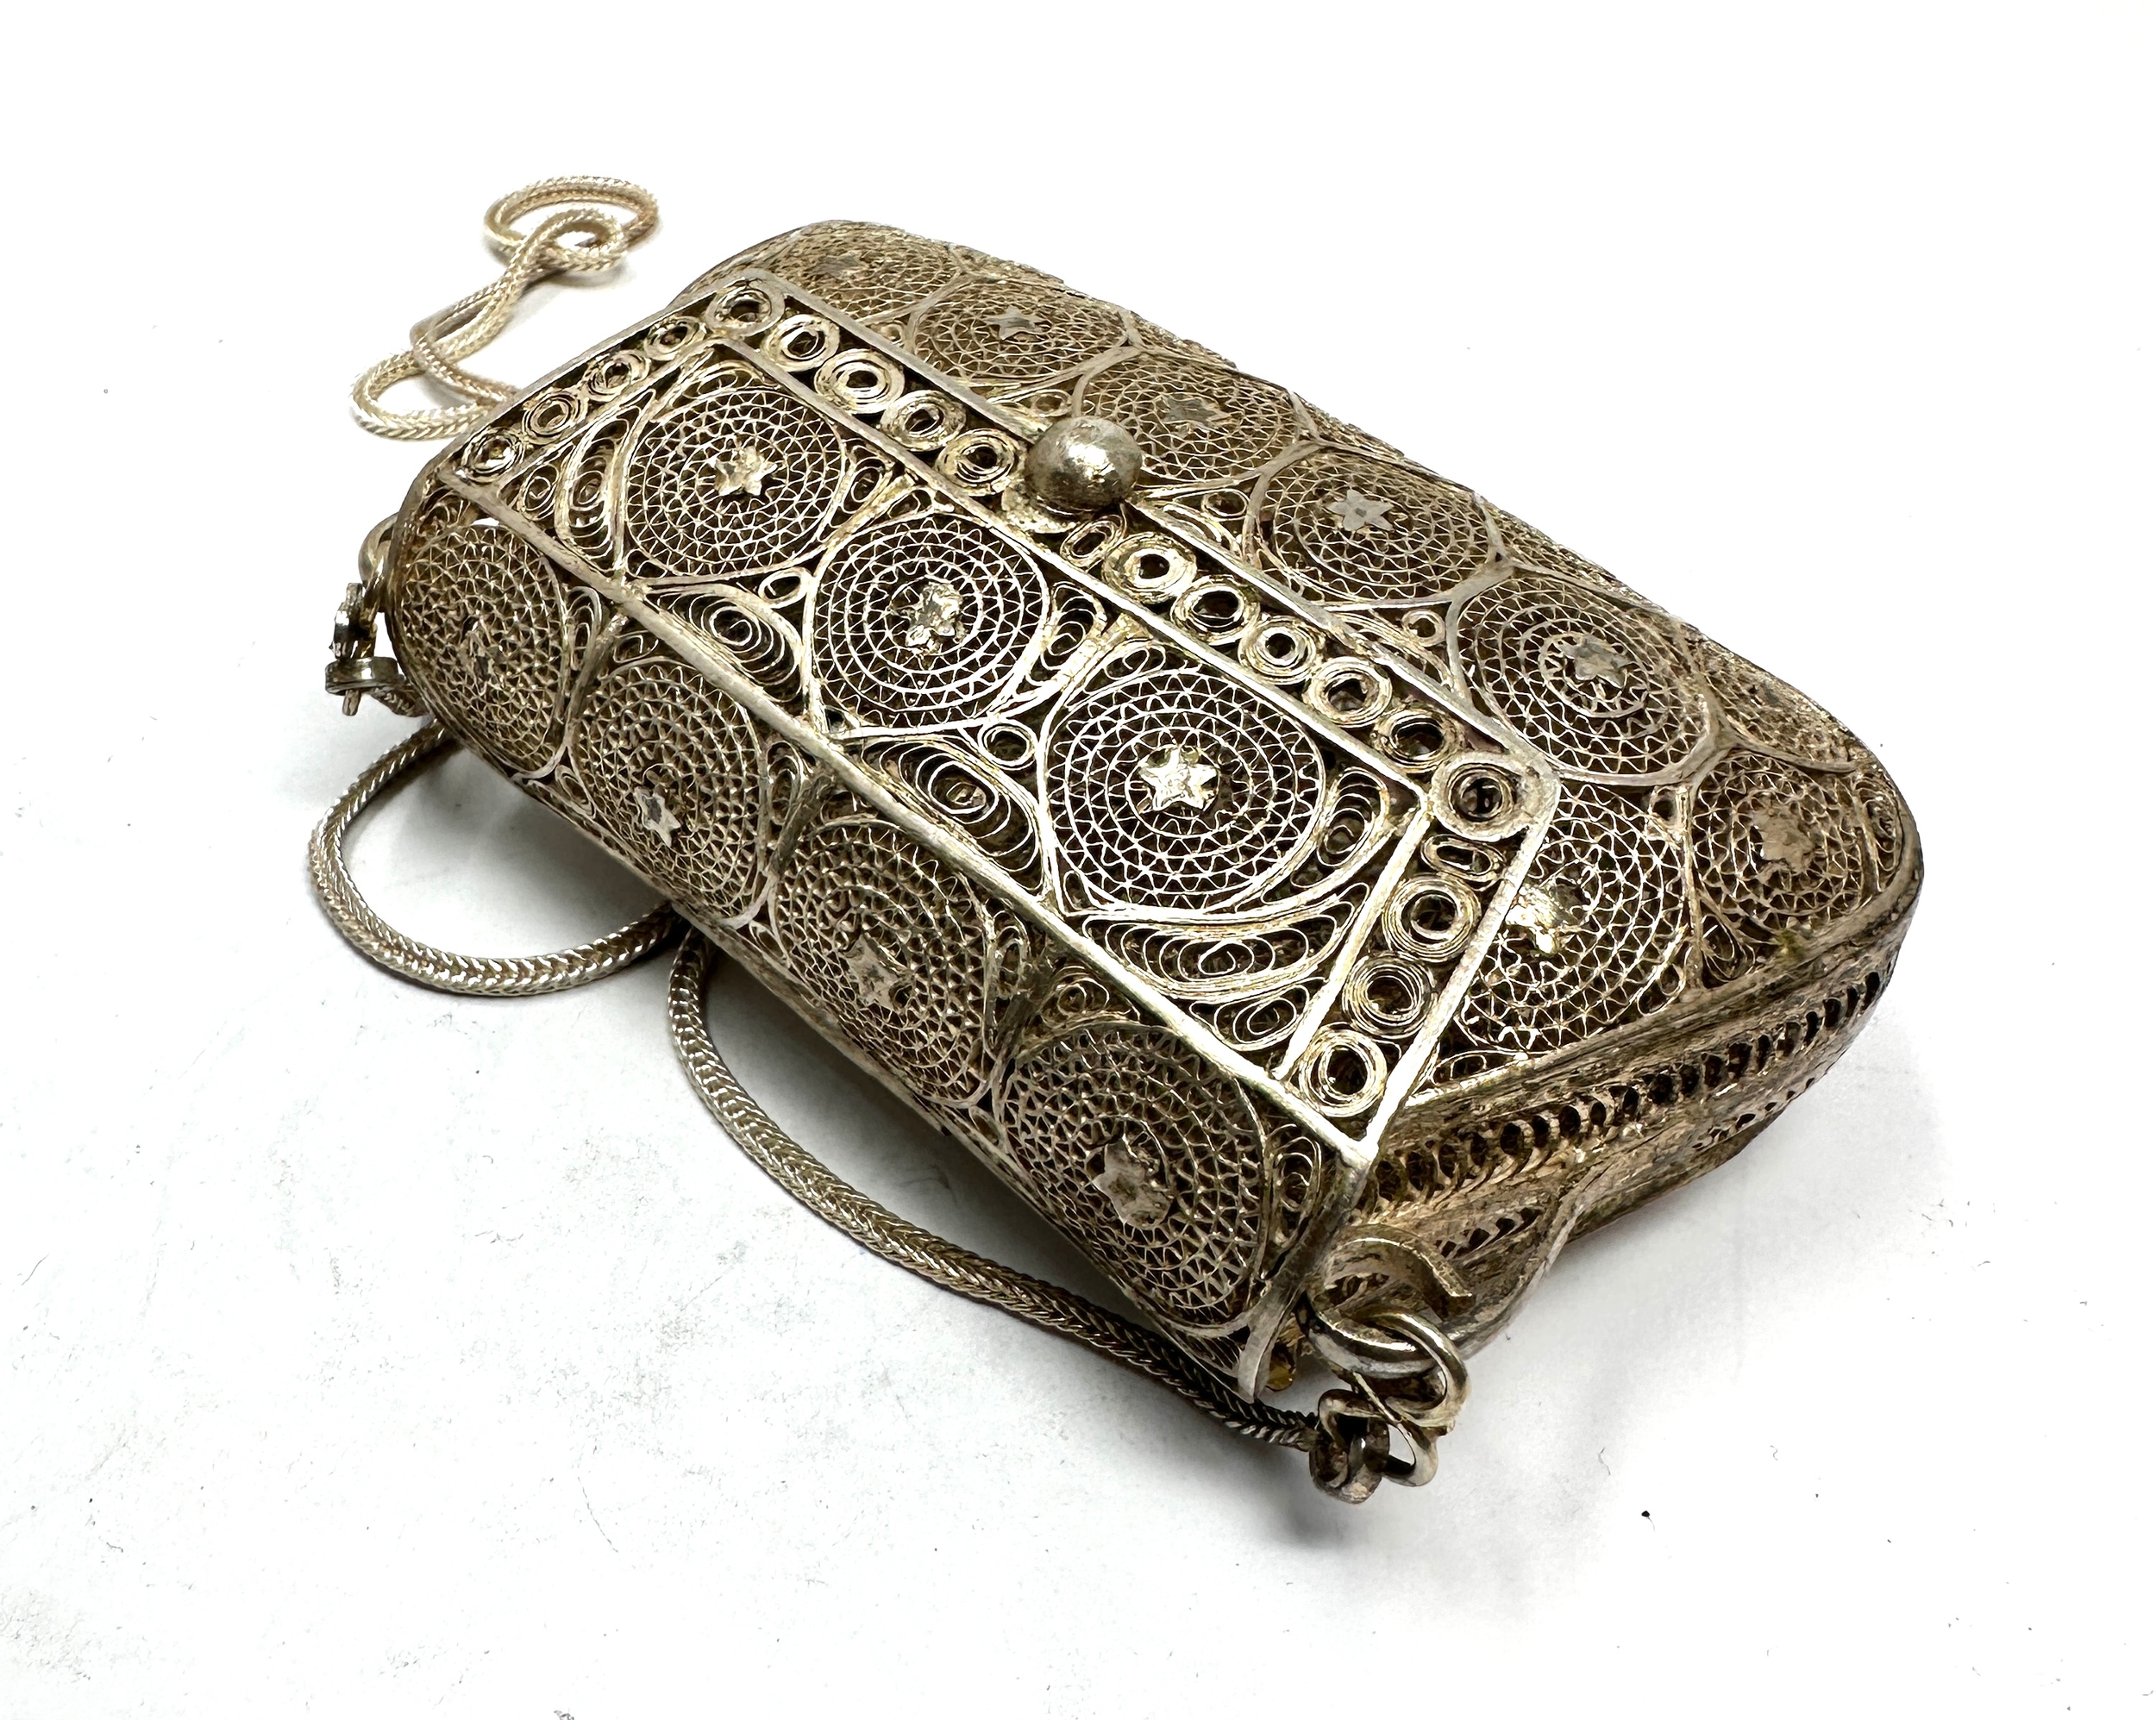 Silver Filigree Purse Bag marked BJI xrt tested as 925 silver weight 123g - Image 4 of 5